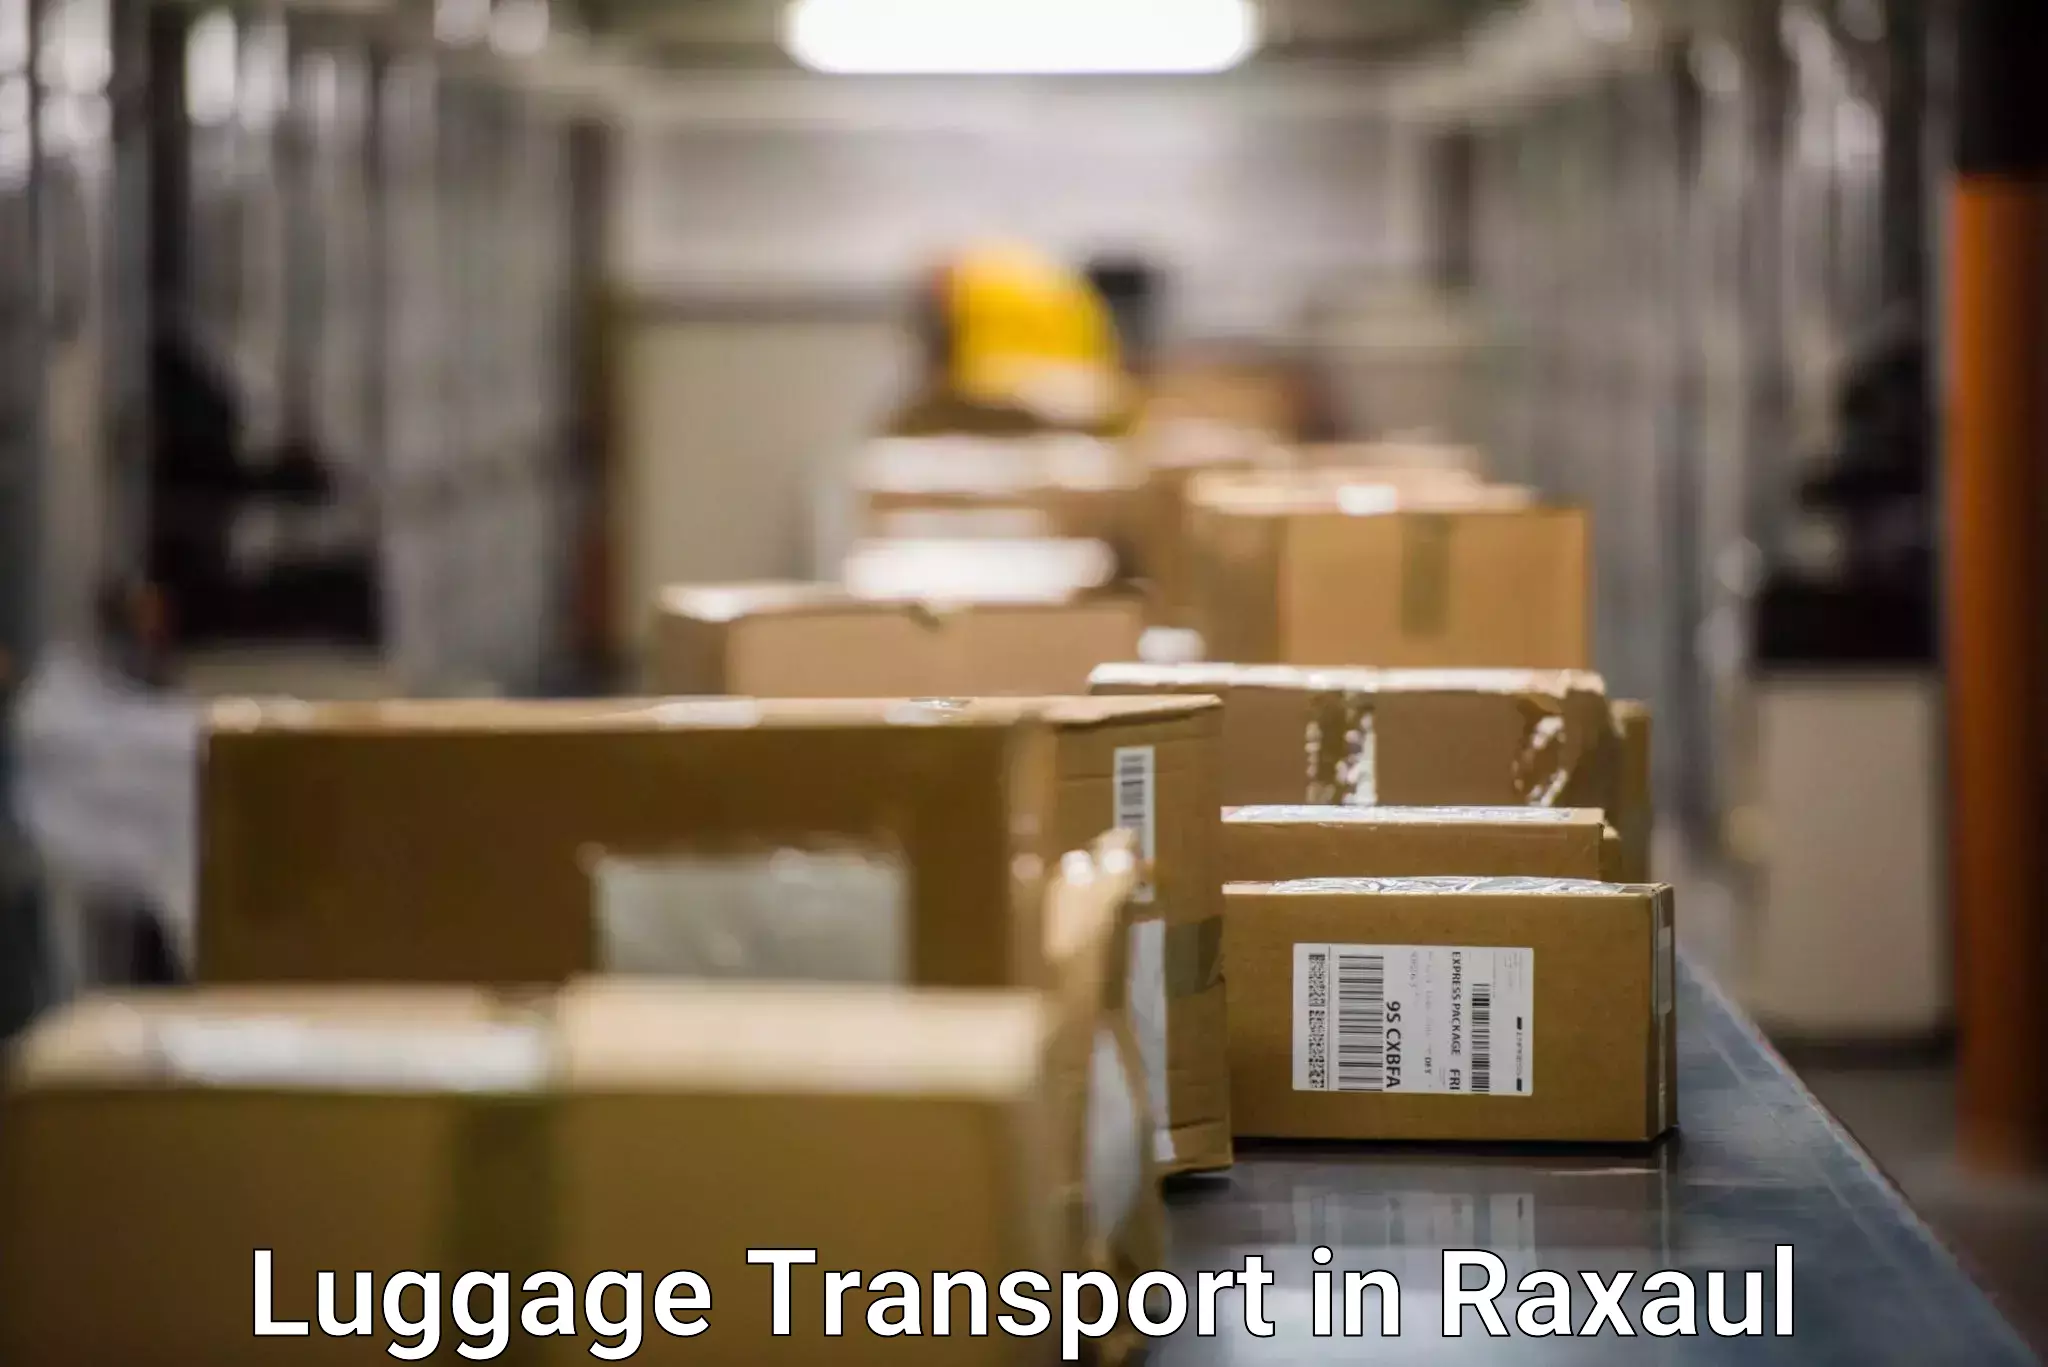 Baggage transport services in Raxaul